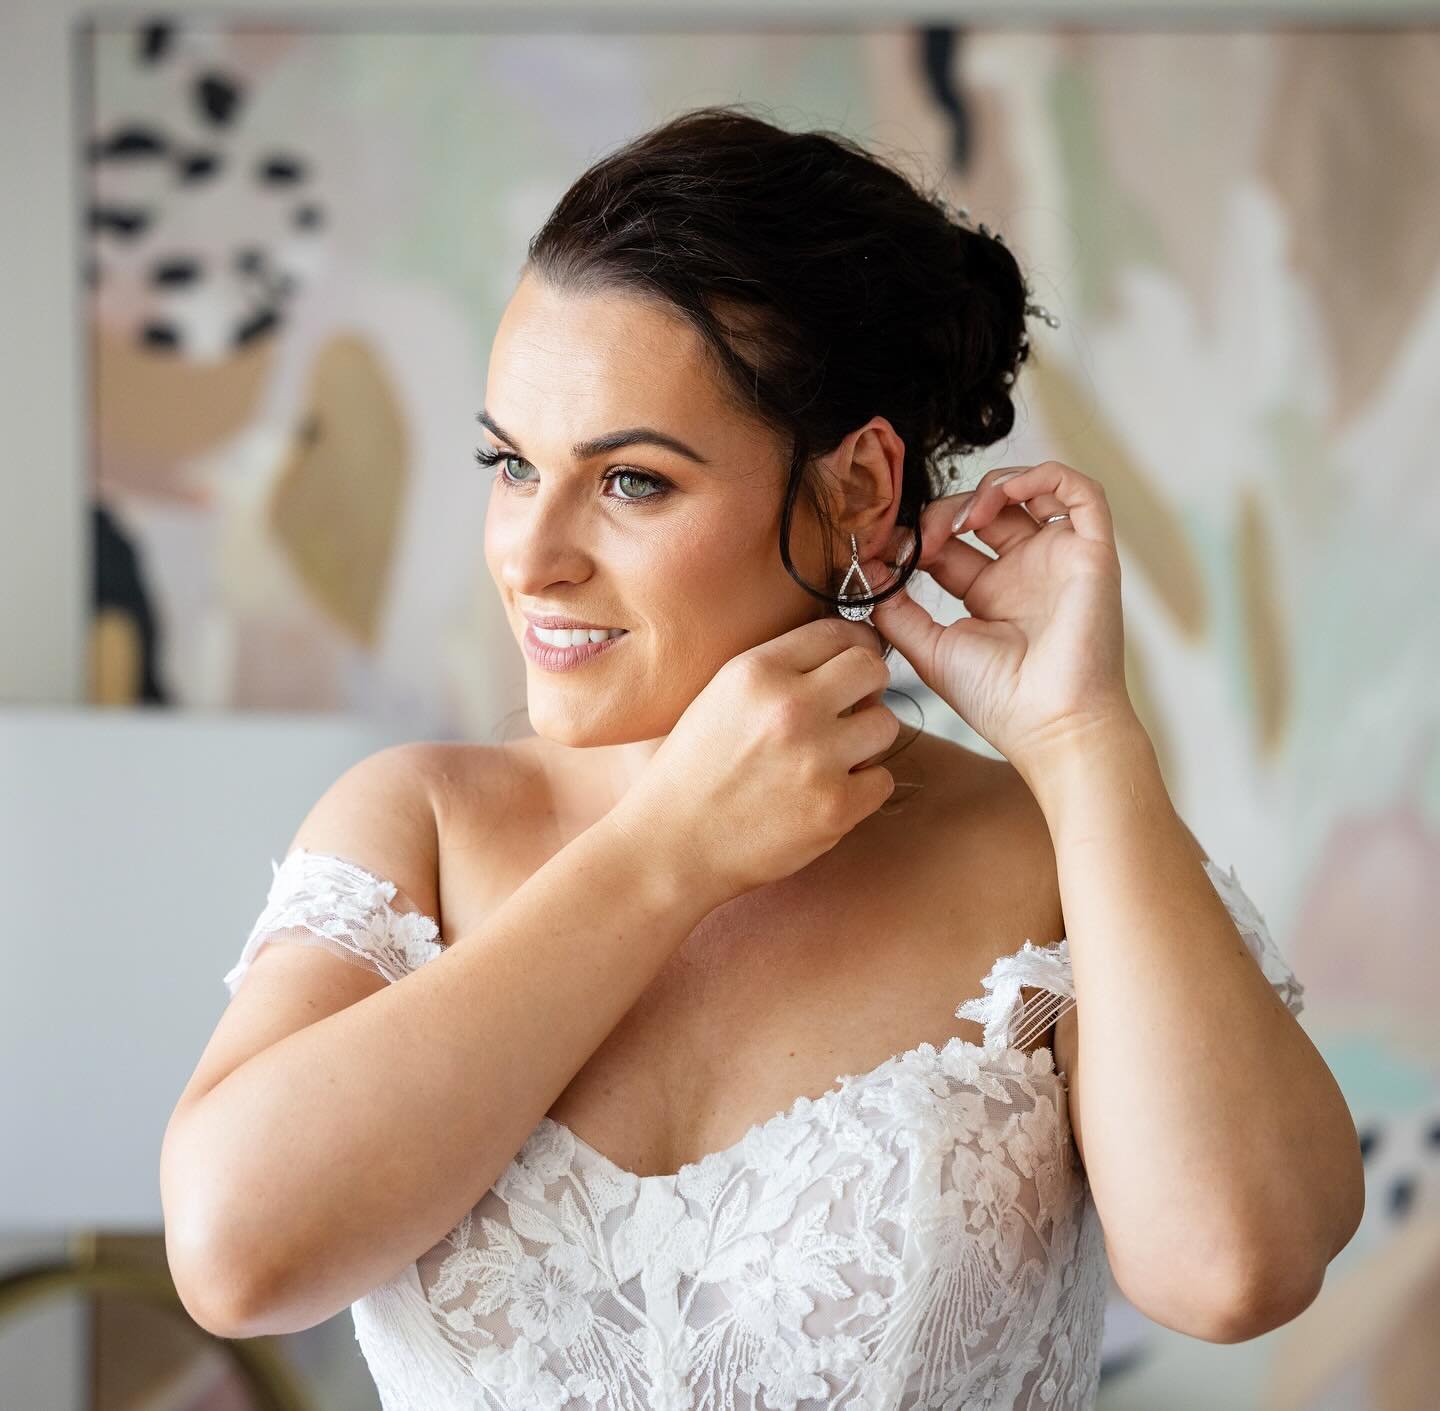 Our glowing bride Emily✨
Love some final getting ready shots 📸👰🏻&zwj;♀️
Photography: @adamspoonerphotography 
For Hair and Makeup bookings; Enquire here 👉🏻 hello@makeupbymelody.com.au